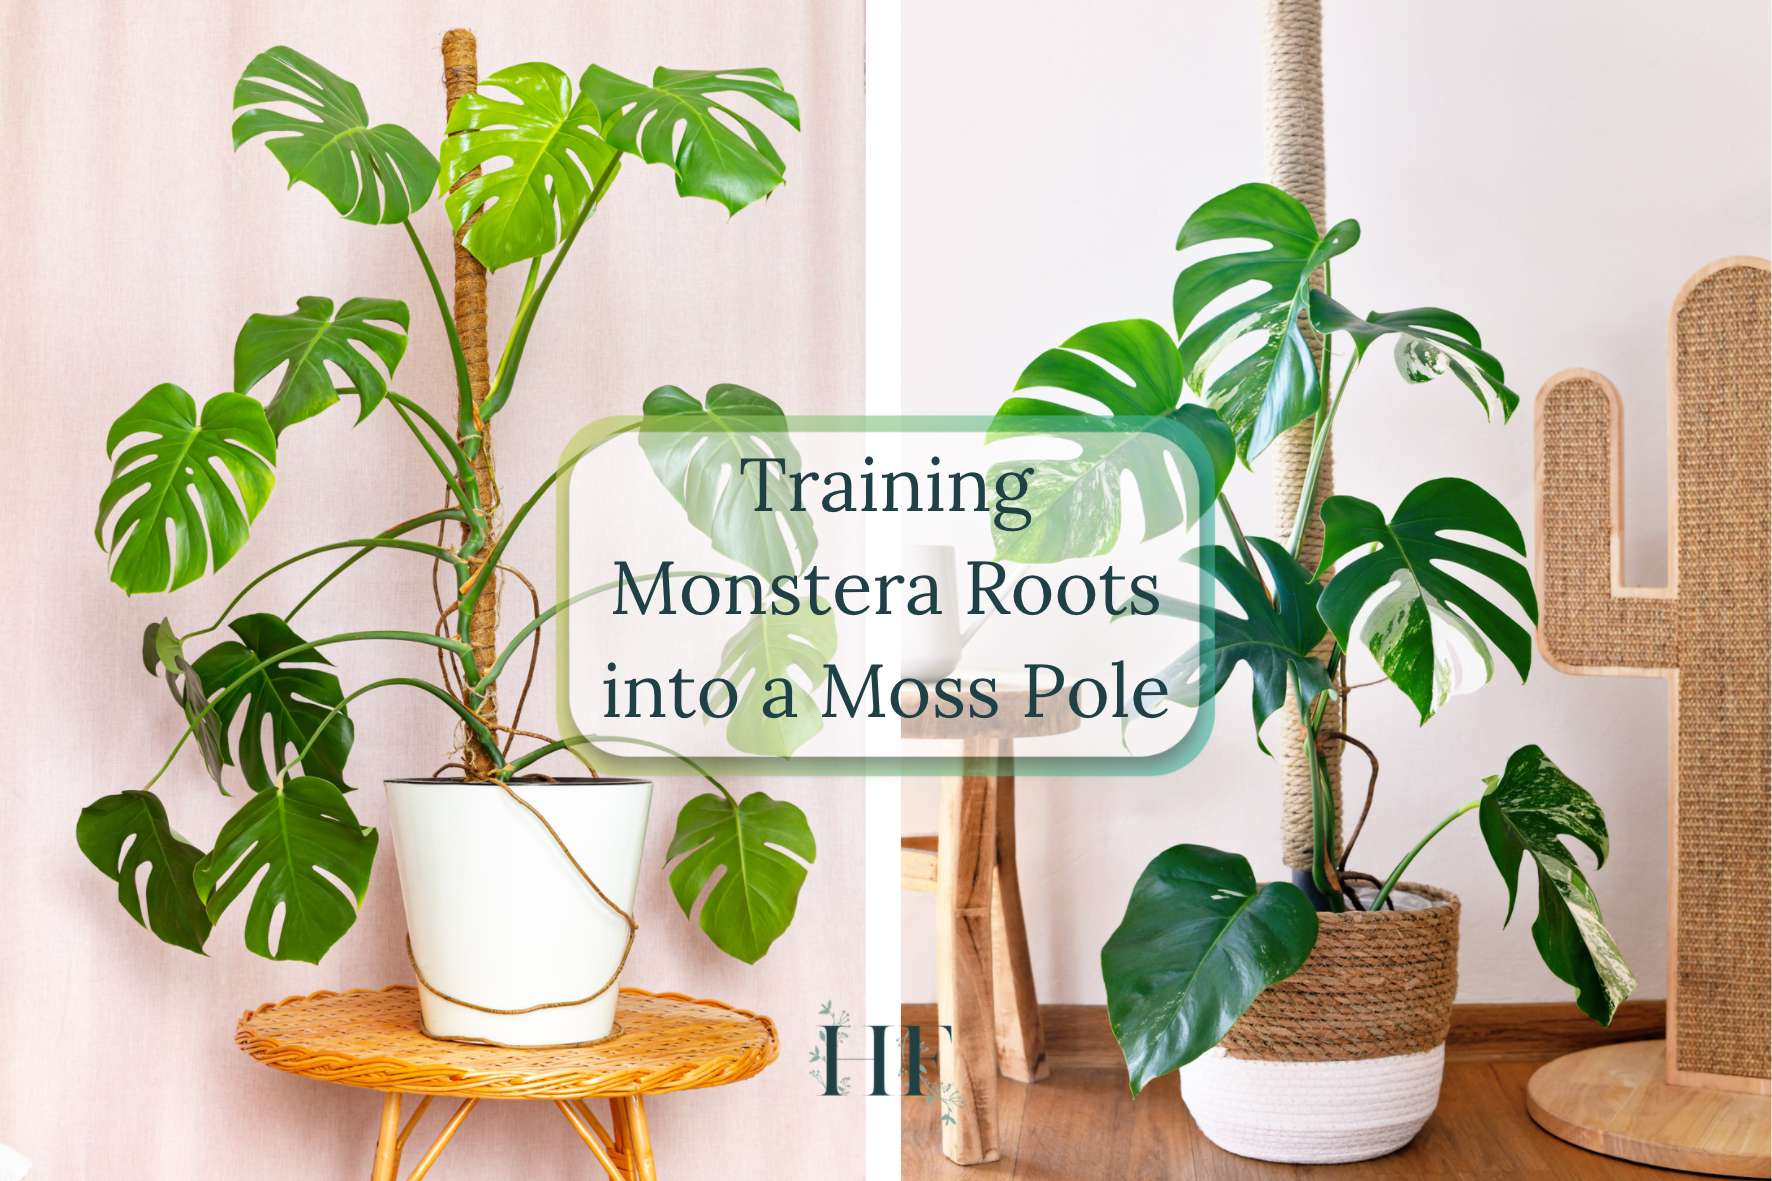 training-monstera-roots-into-a-moss-pole